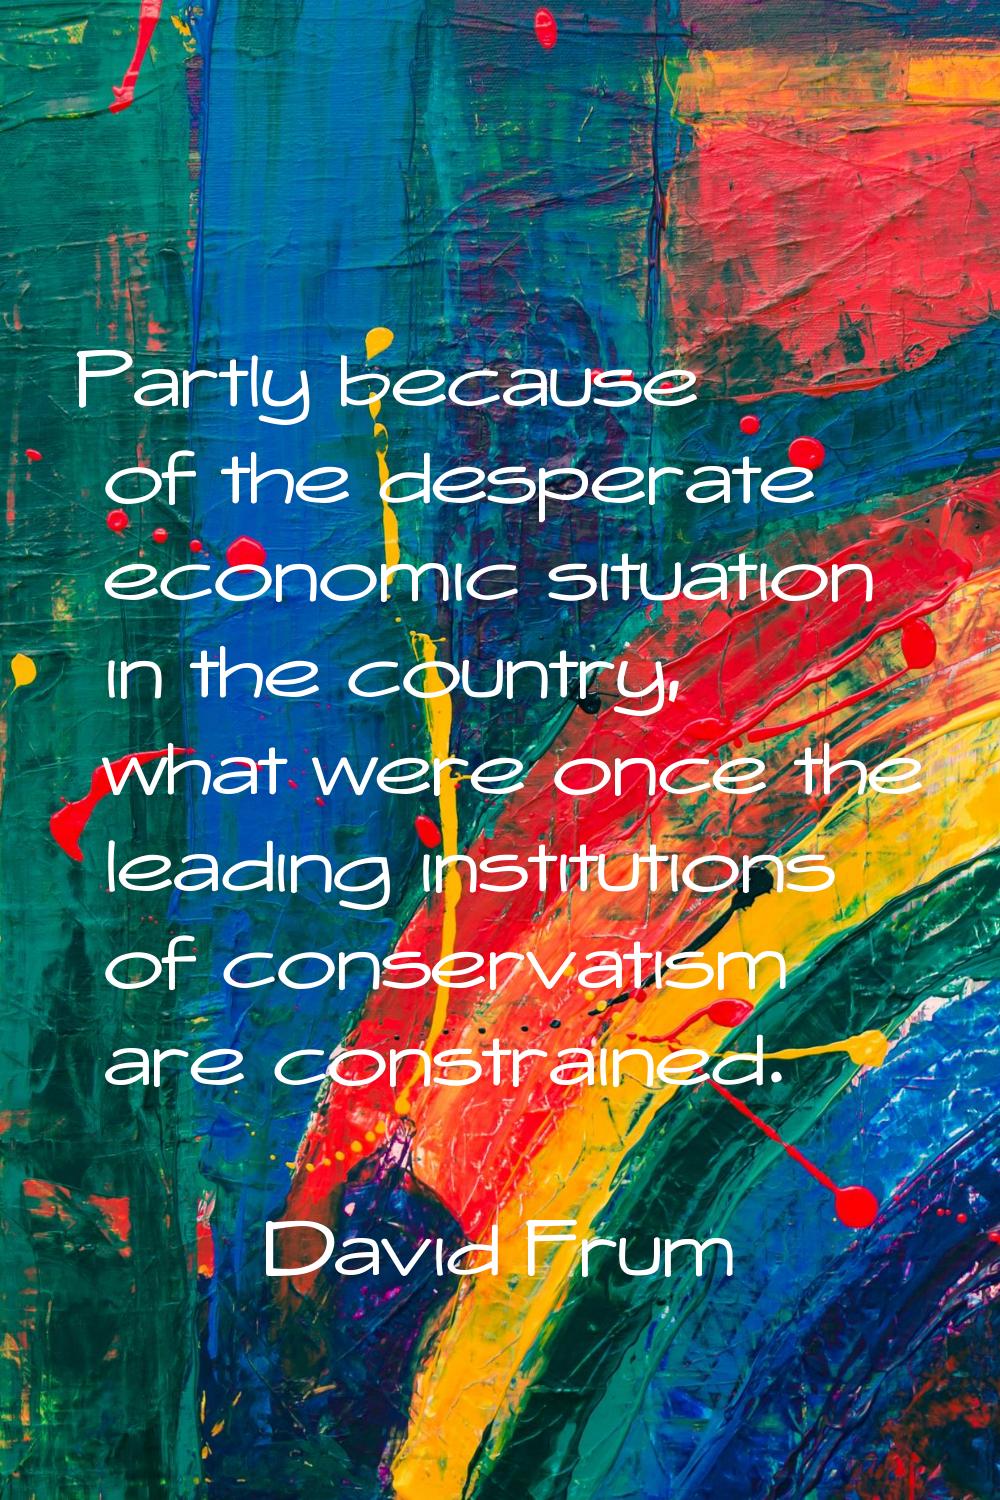 Partly because of the desperate economic situation in the country, what were once the leading insti